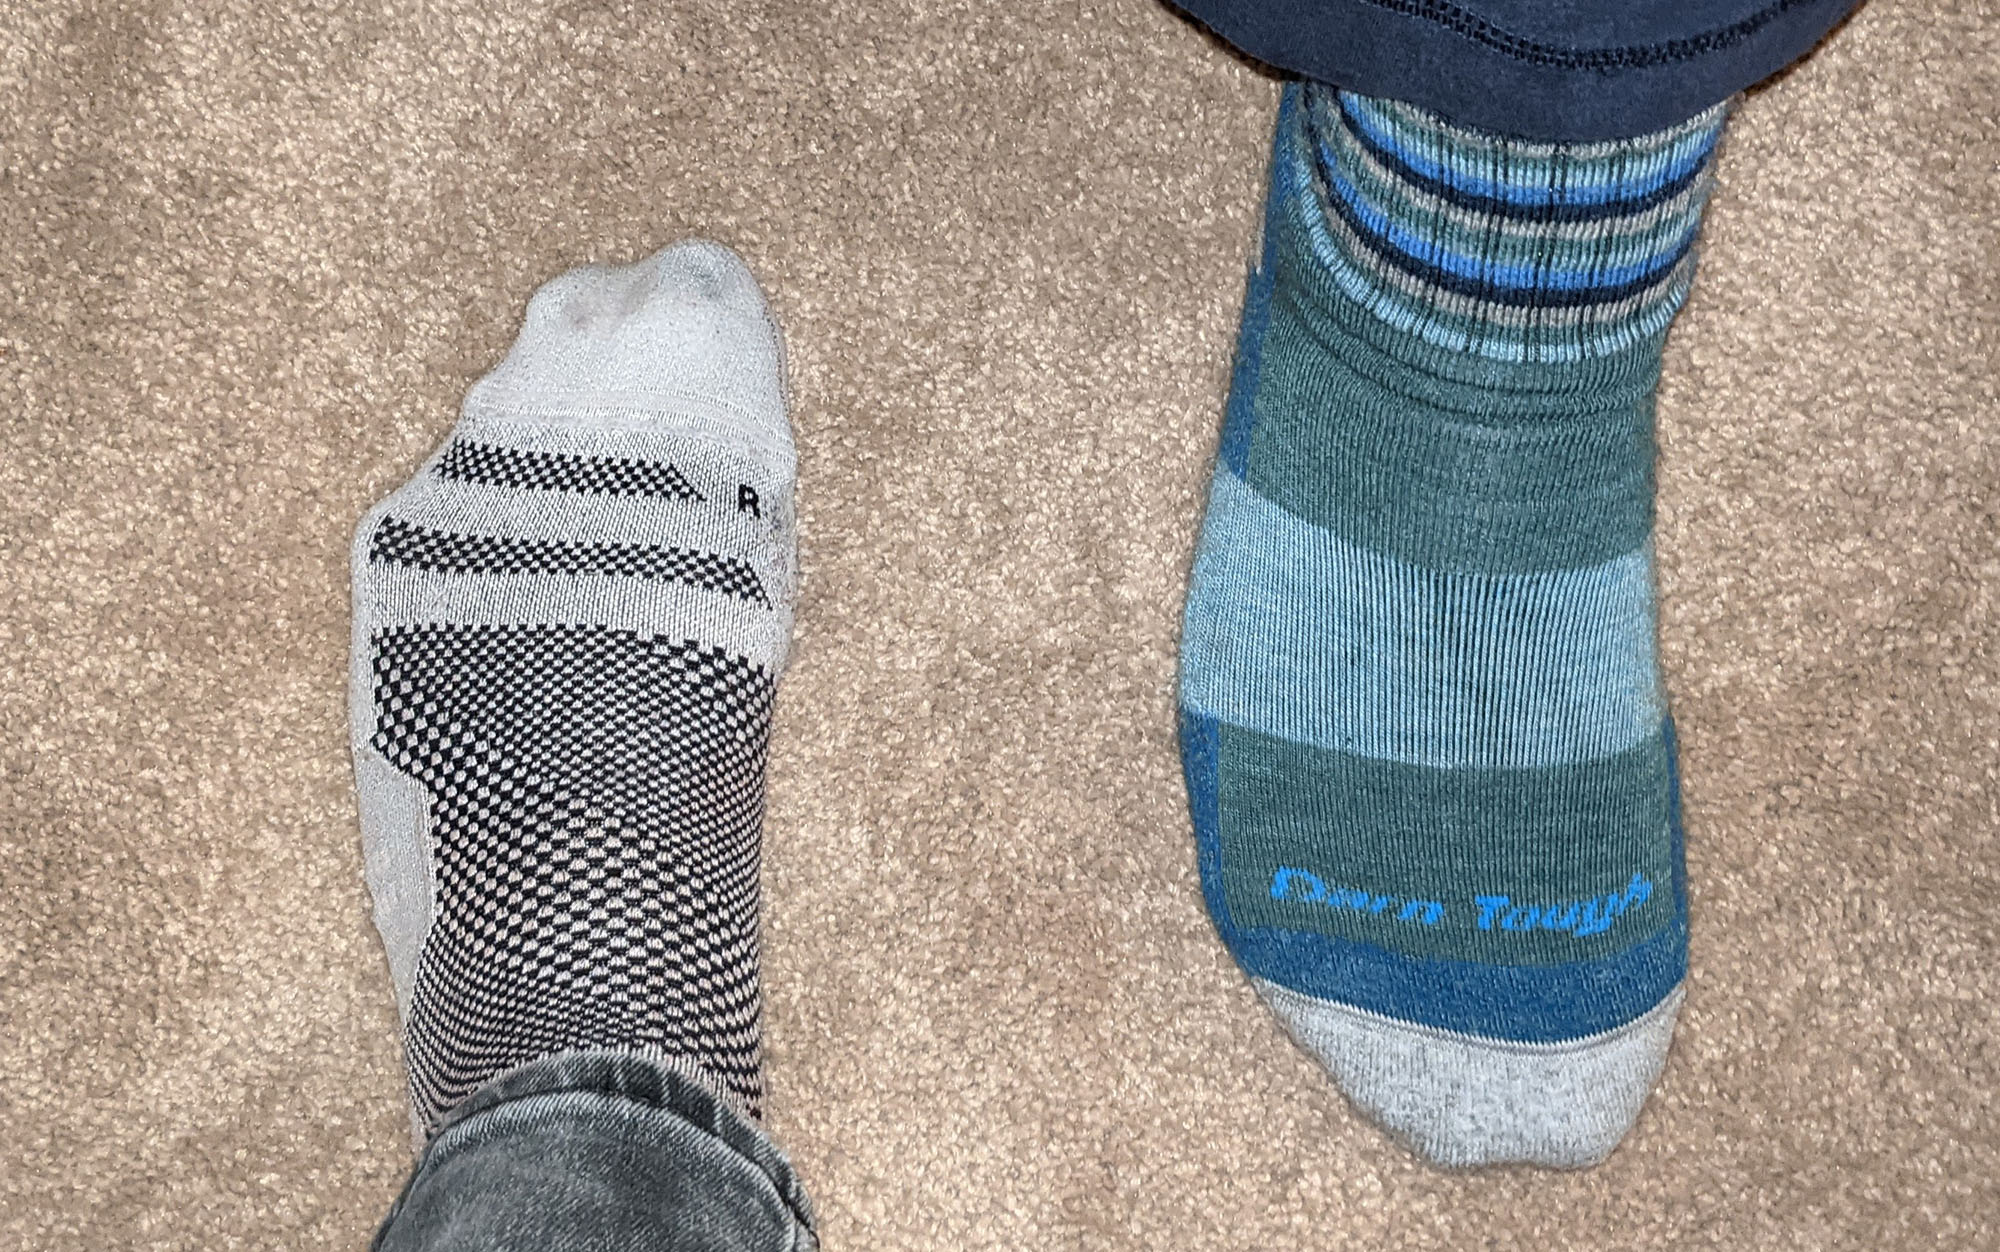 My typical-width foot (left) next to my sisterâs wide-width foot (right). We may both wear size 9s, but our experience with footwear is vastly different due to our different widths. 